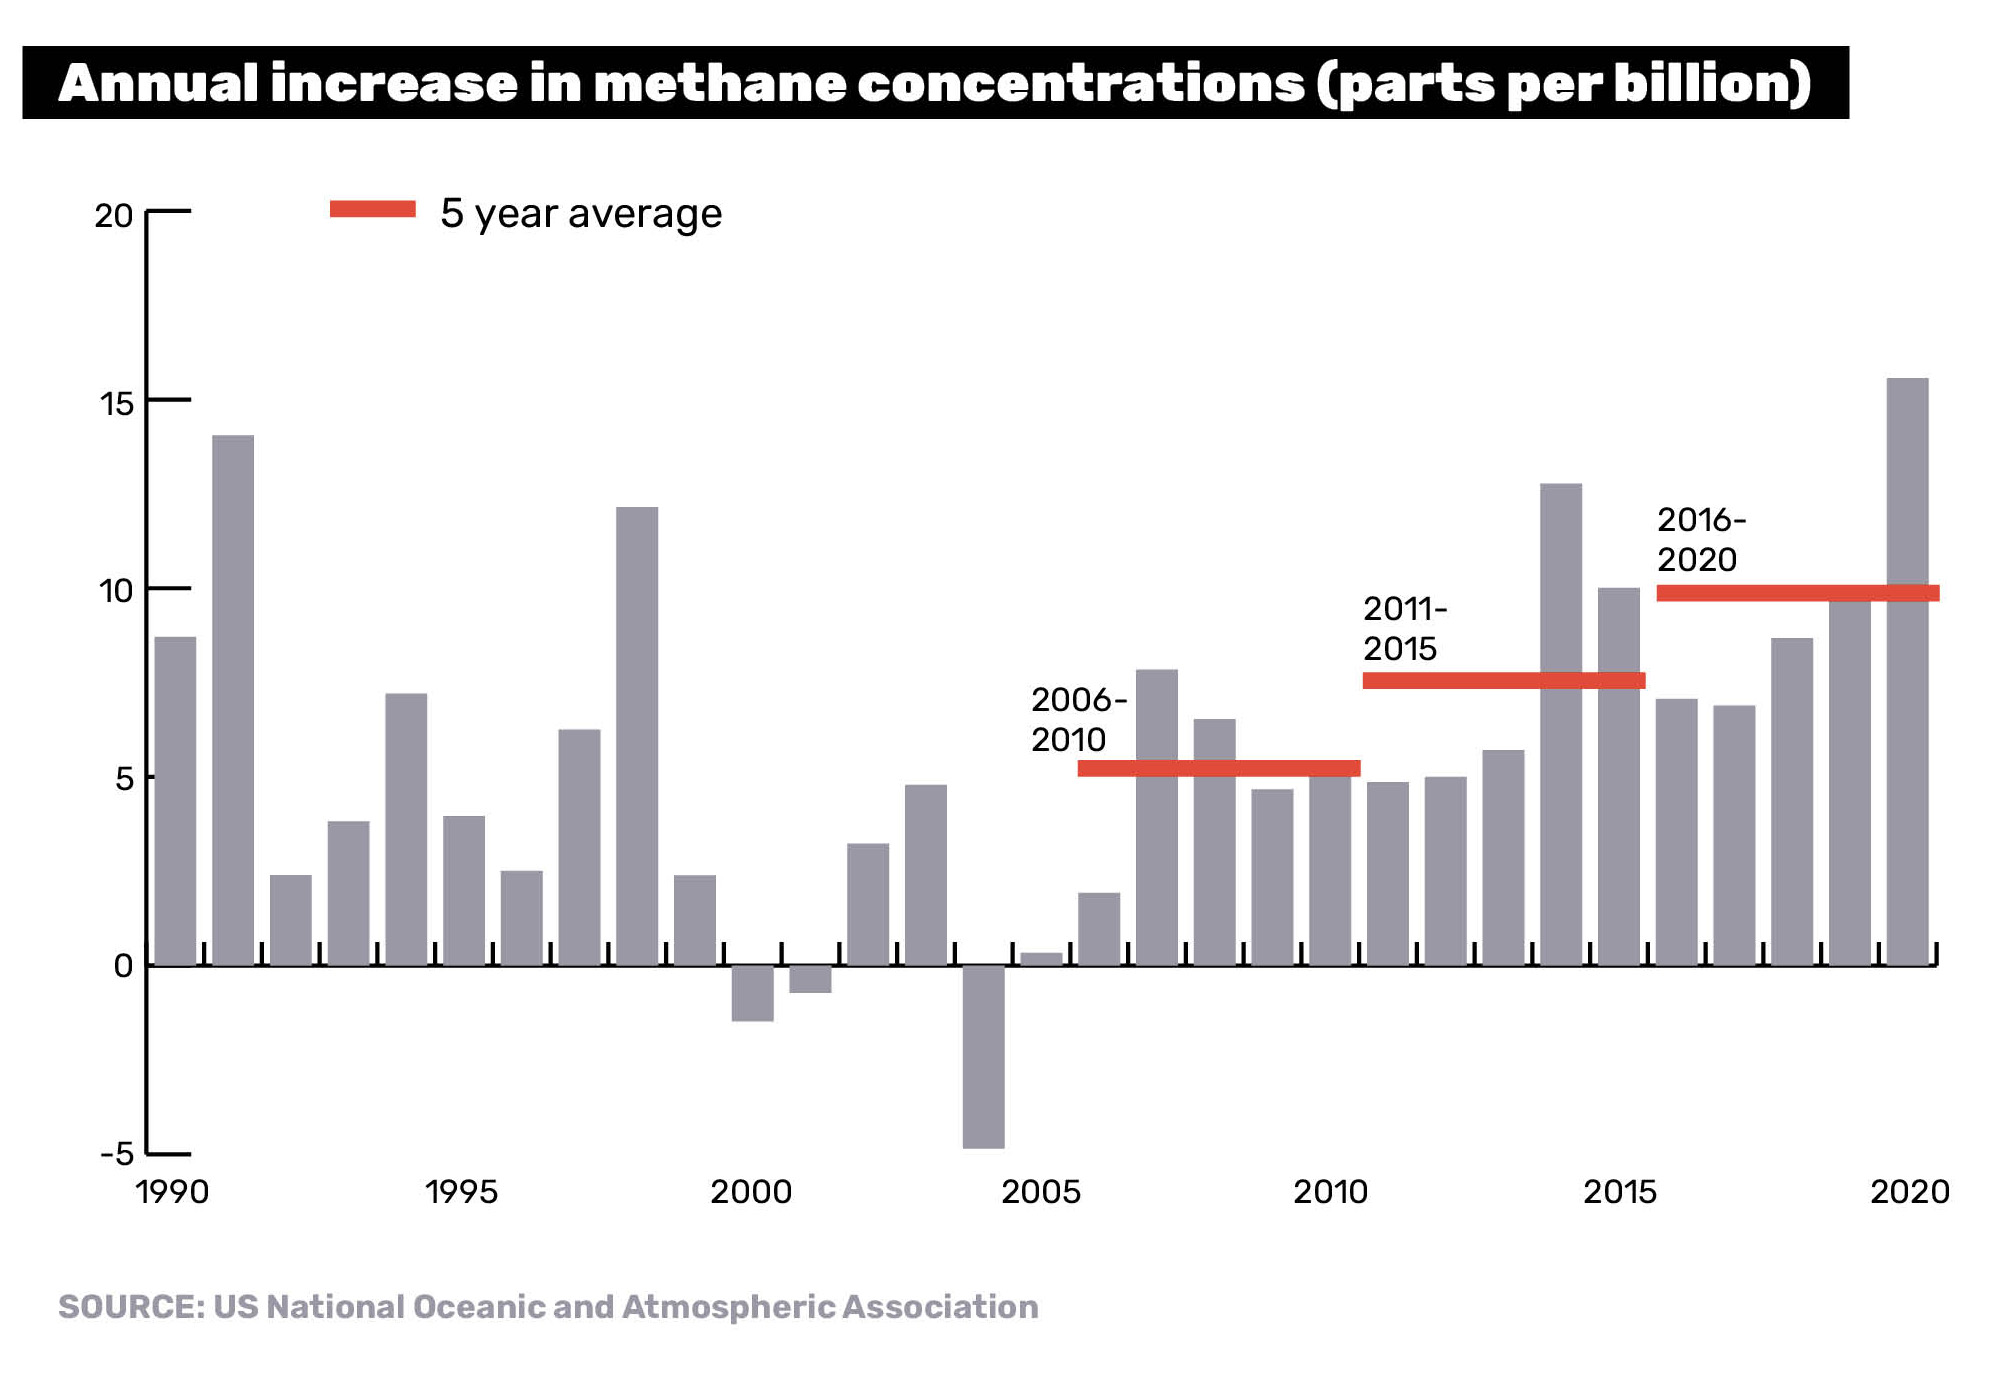 Graph showing annual increase in methane concentrations in the atmosphere from 1990-2020